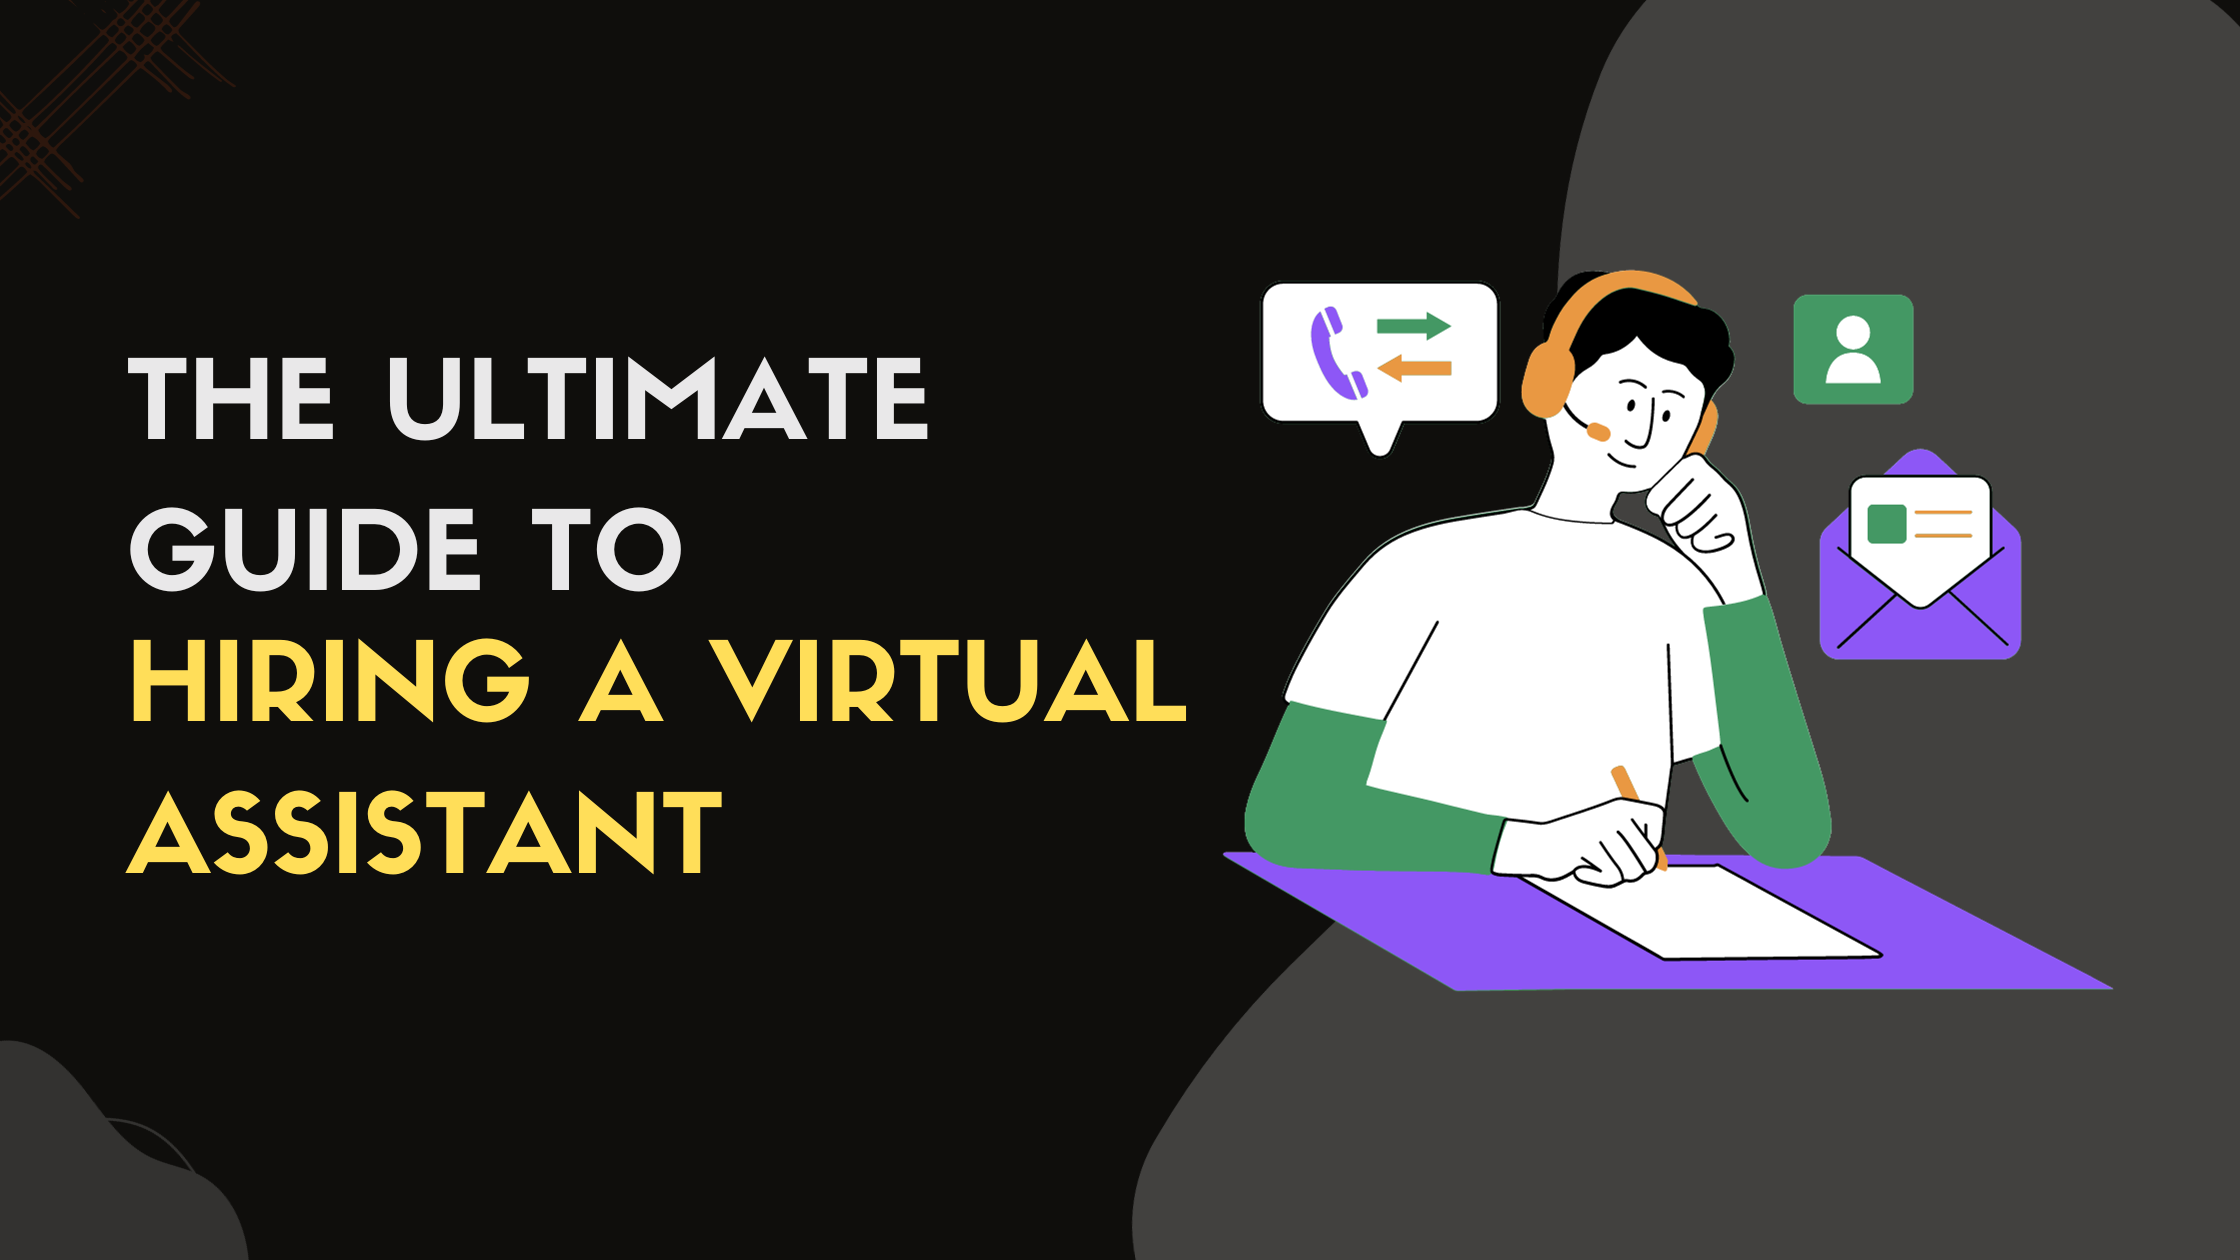 You are currently viewing The Ultimate Guide to Hiring a Virtual Assistant